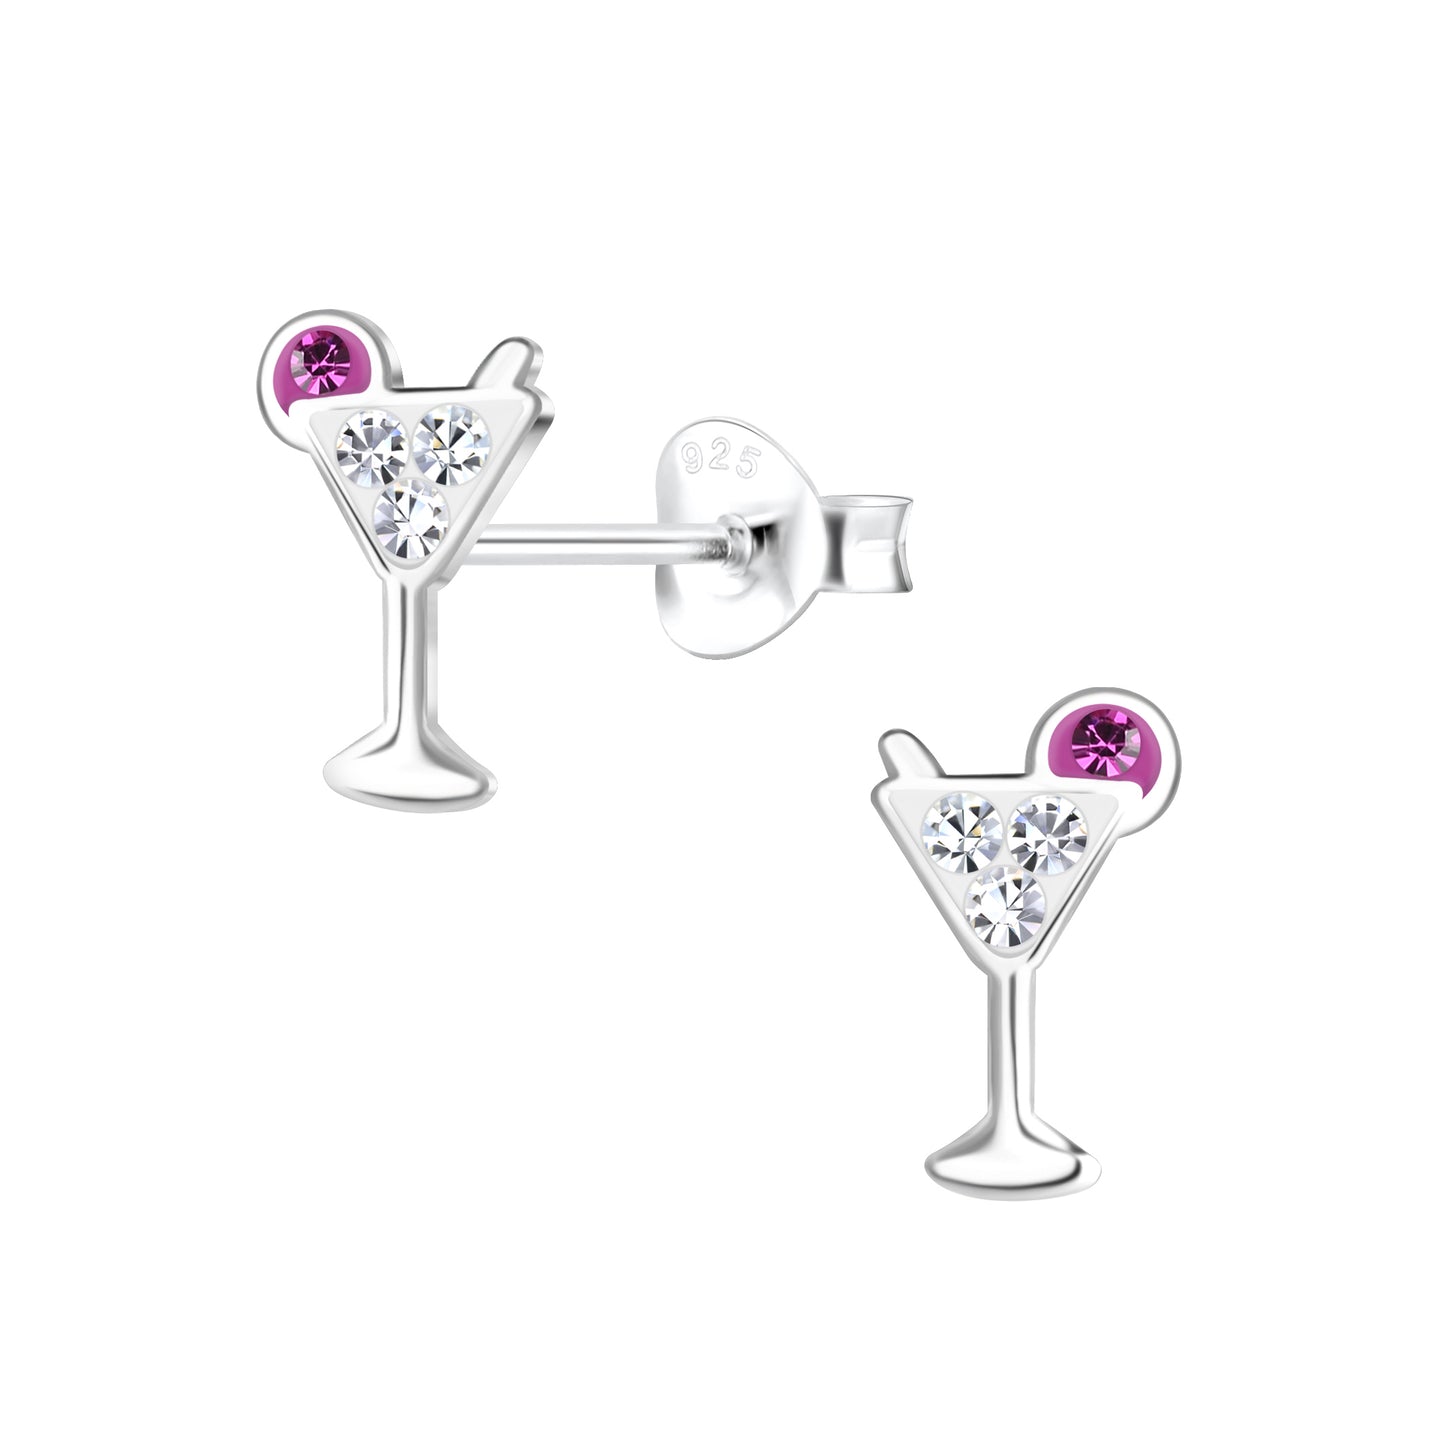 Cocktail glass martini sterling silver earrings with crystal details